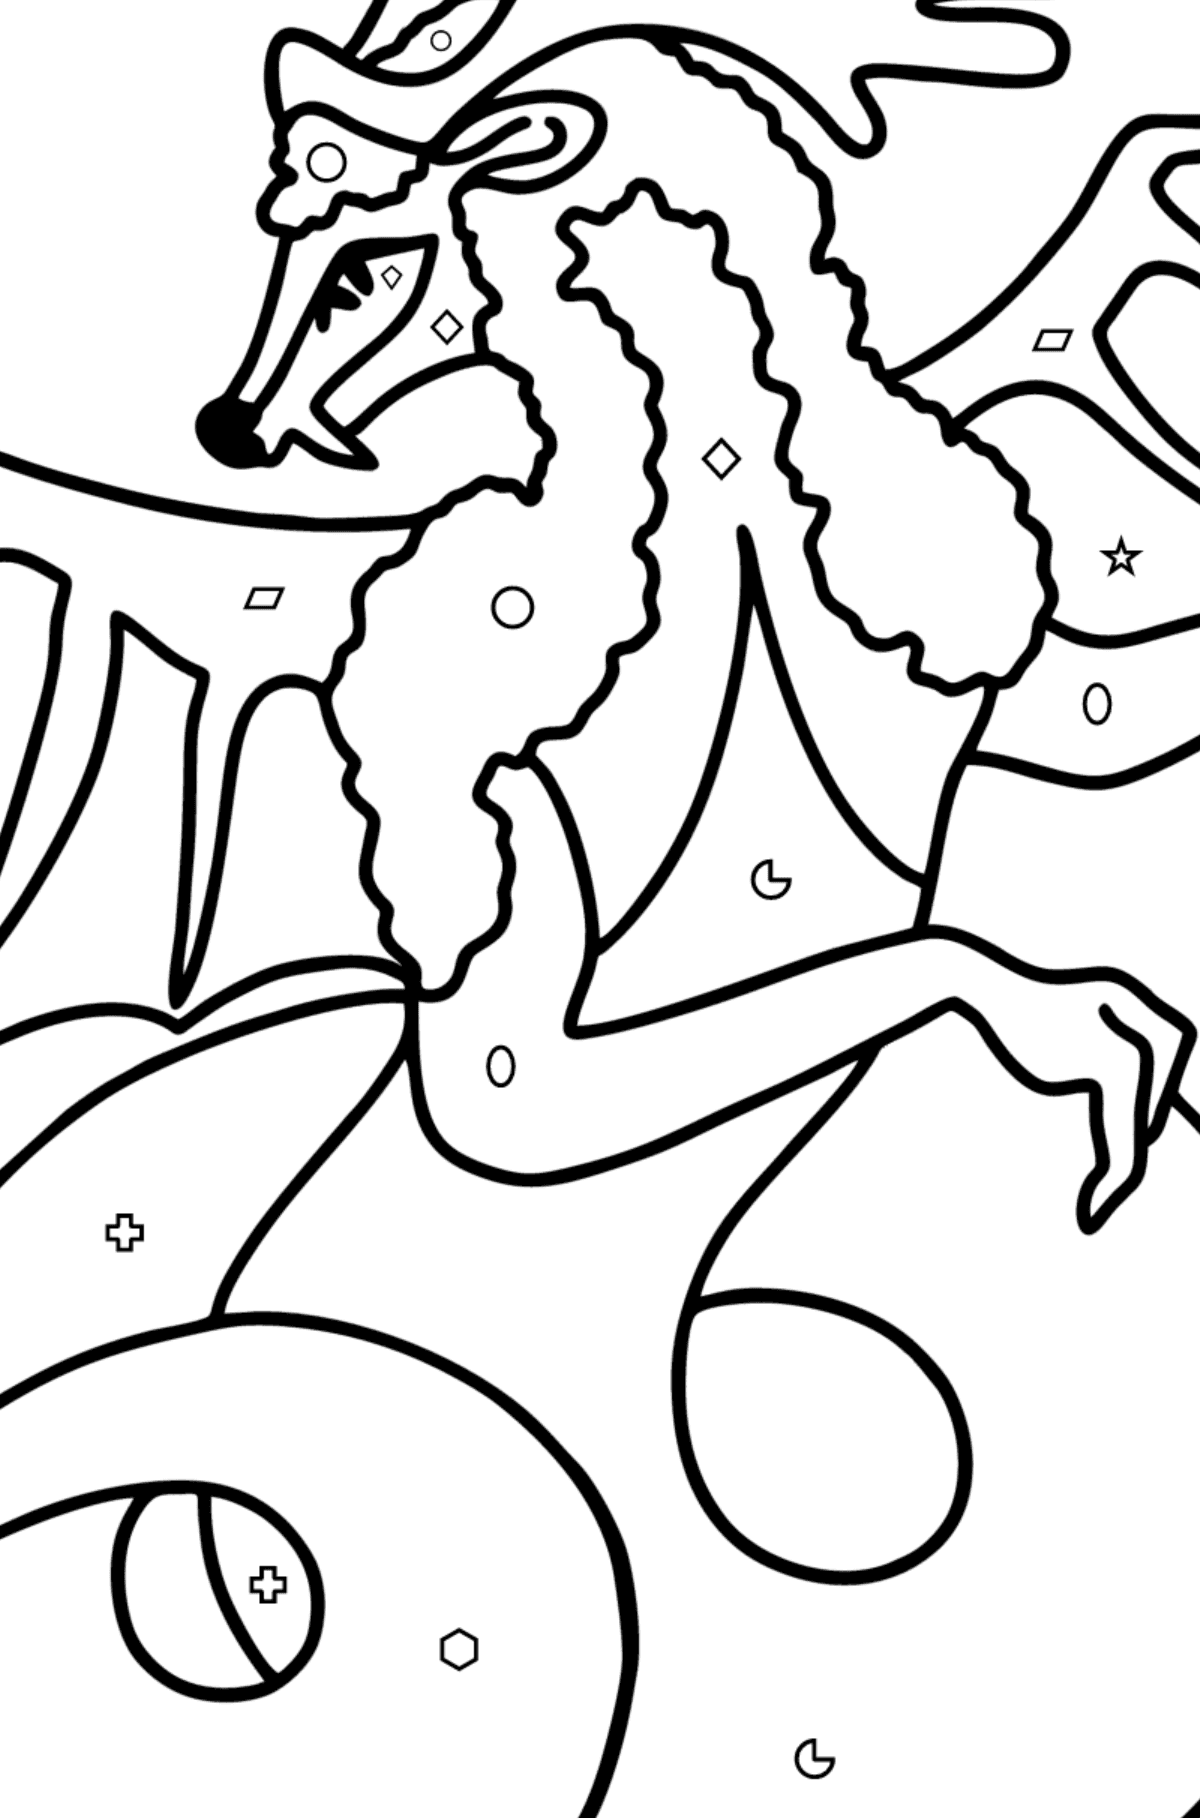 Beautiful Dragon coloring page - Coloring by Geometric Shapes for Kids